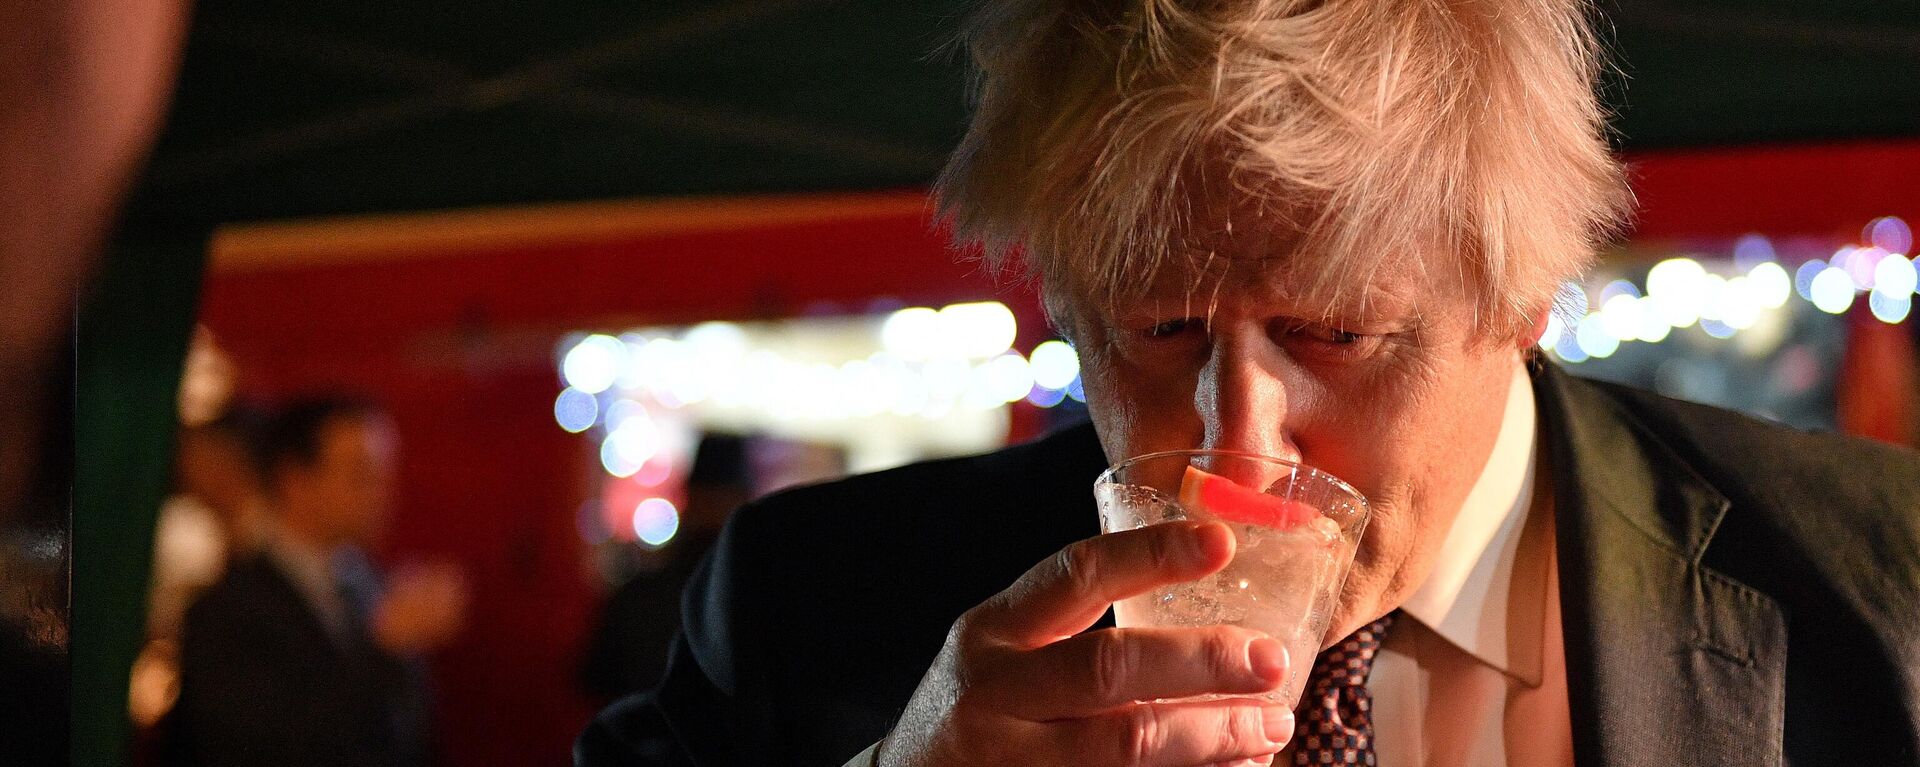 Britain's Prime Minister Boris Johnson samples an Isle of Harris Gin as he visits a UK Food and Drinks market set up in Downing Street, central London on November 30, 2021 - Sputnik International, 1920, 26.01.2022